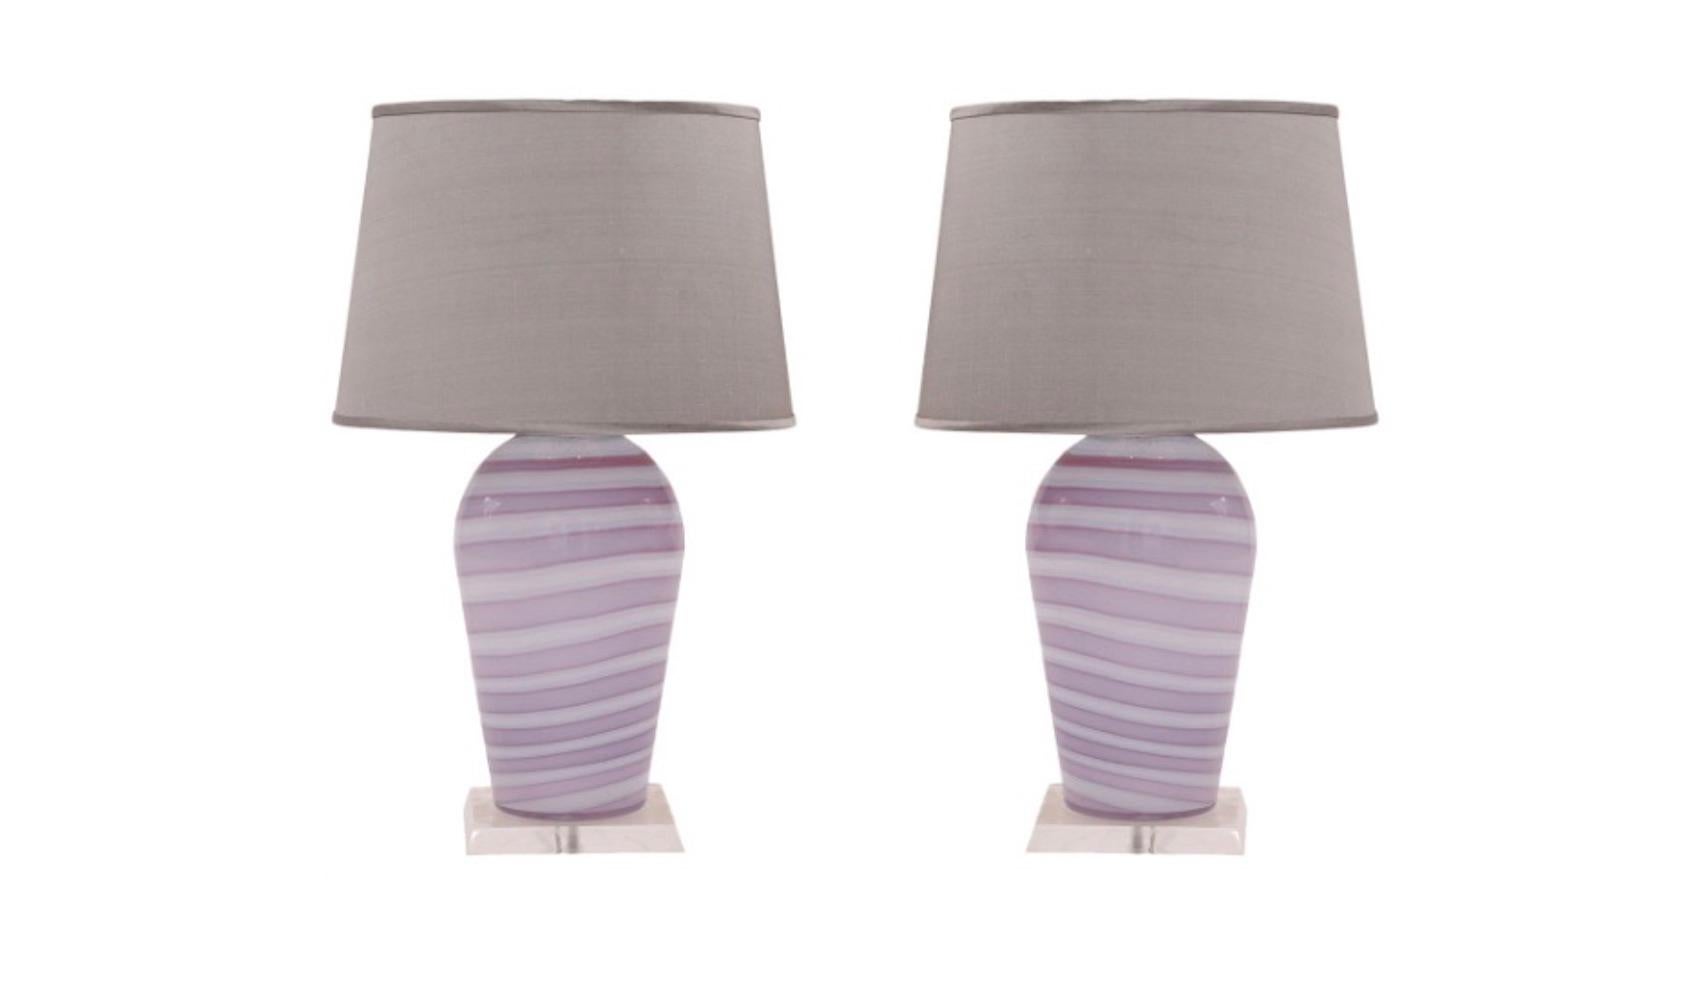 Late 20th Century Striped Italian Murano Glass Table Lamps, 1970's For Sale